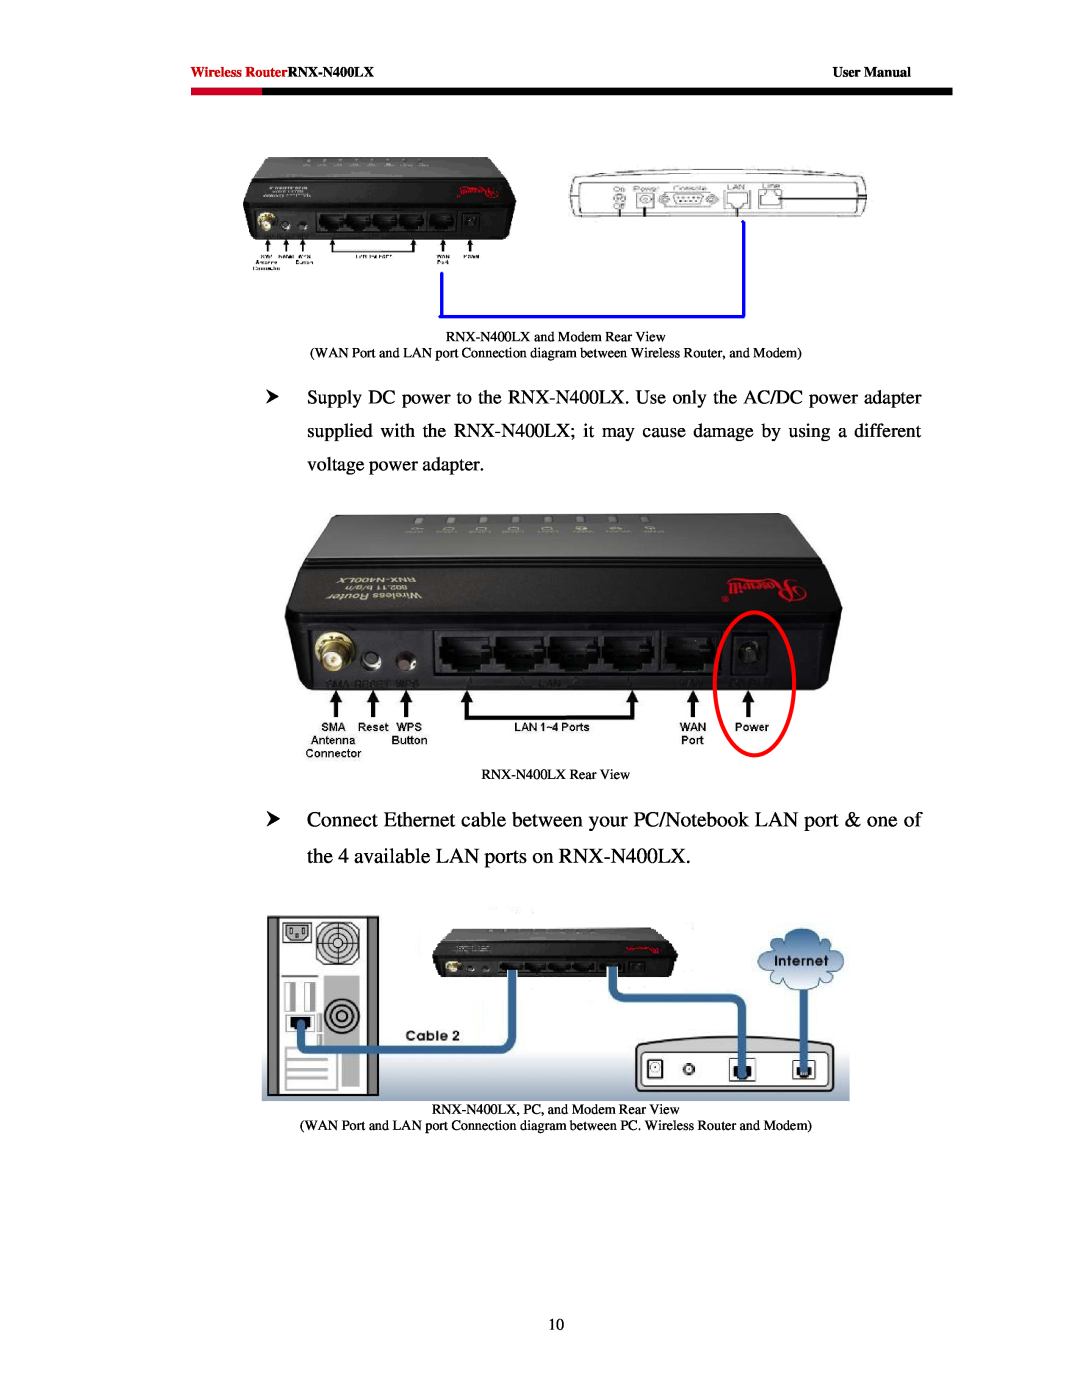 Rosewill user manual Wireless RouterRNX-N400LX, User Manual, RNX-N400LX and Modem Rear View 